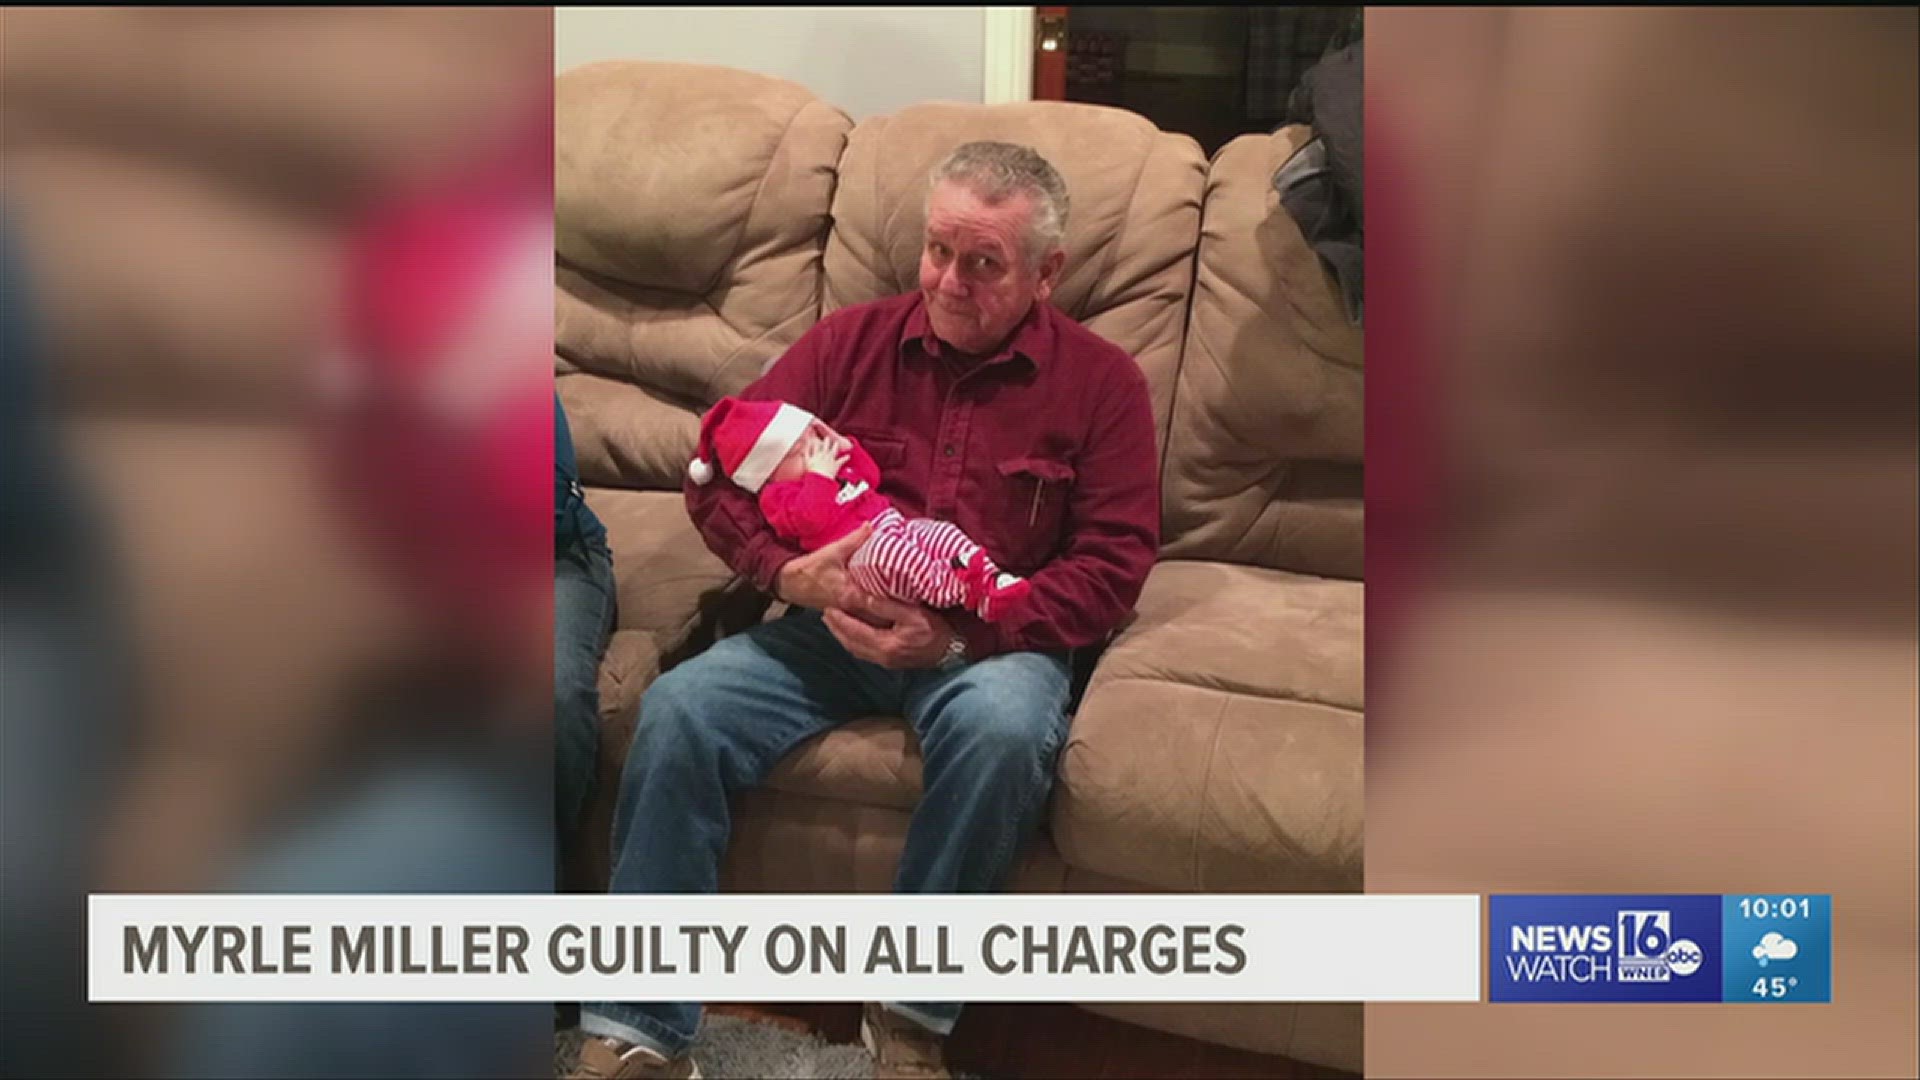 The 78-year-old Miller was found guilty of all charges, including first-degree murder, theft, and forgery.